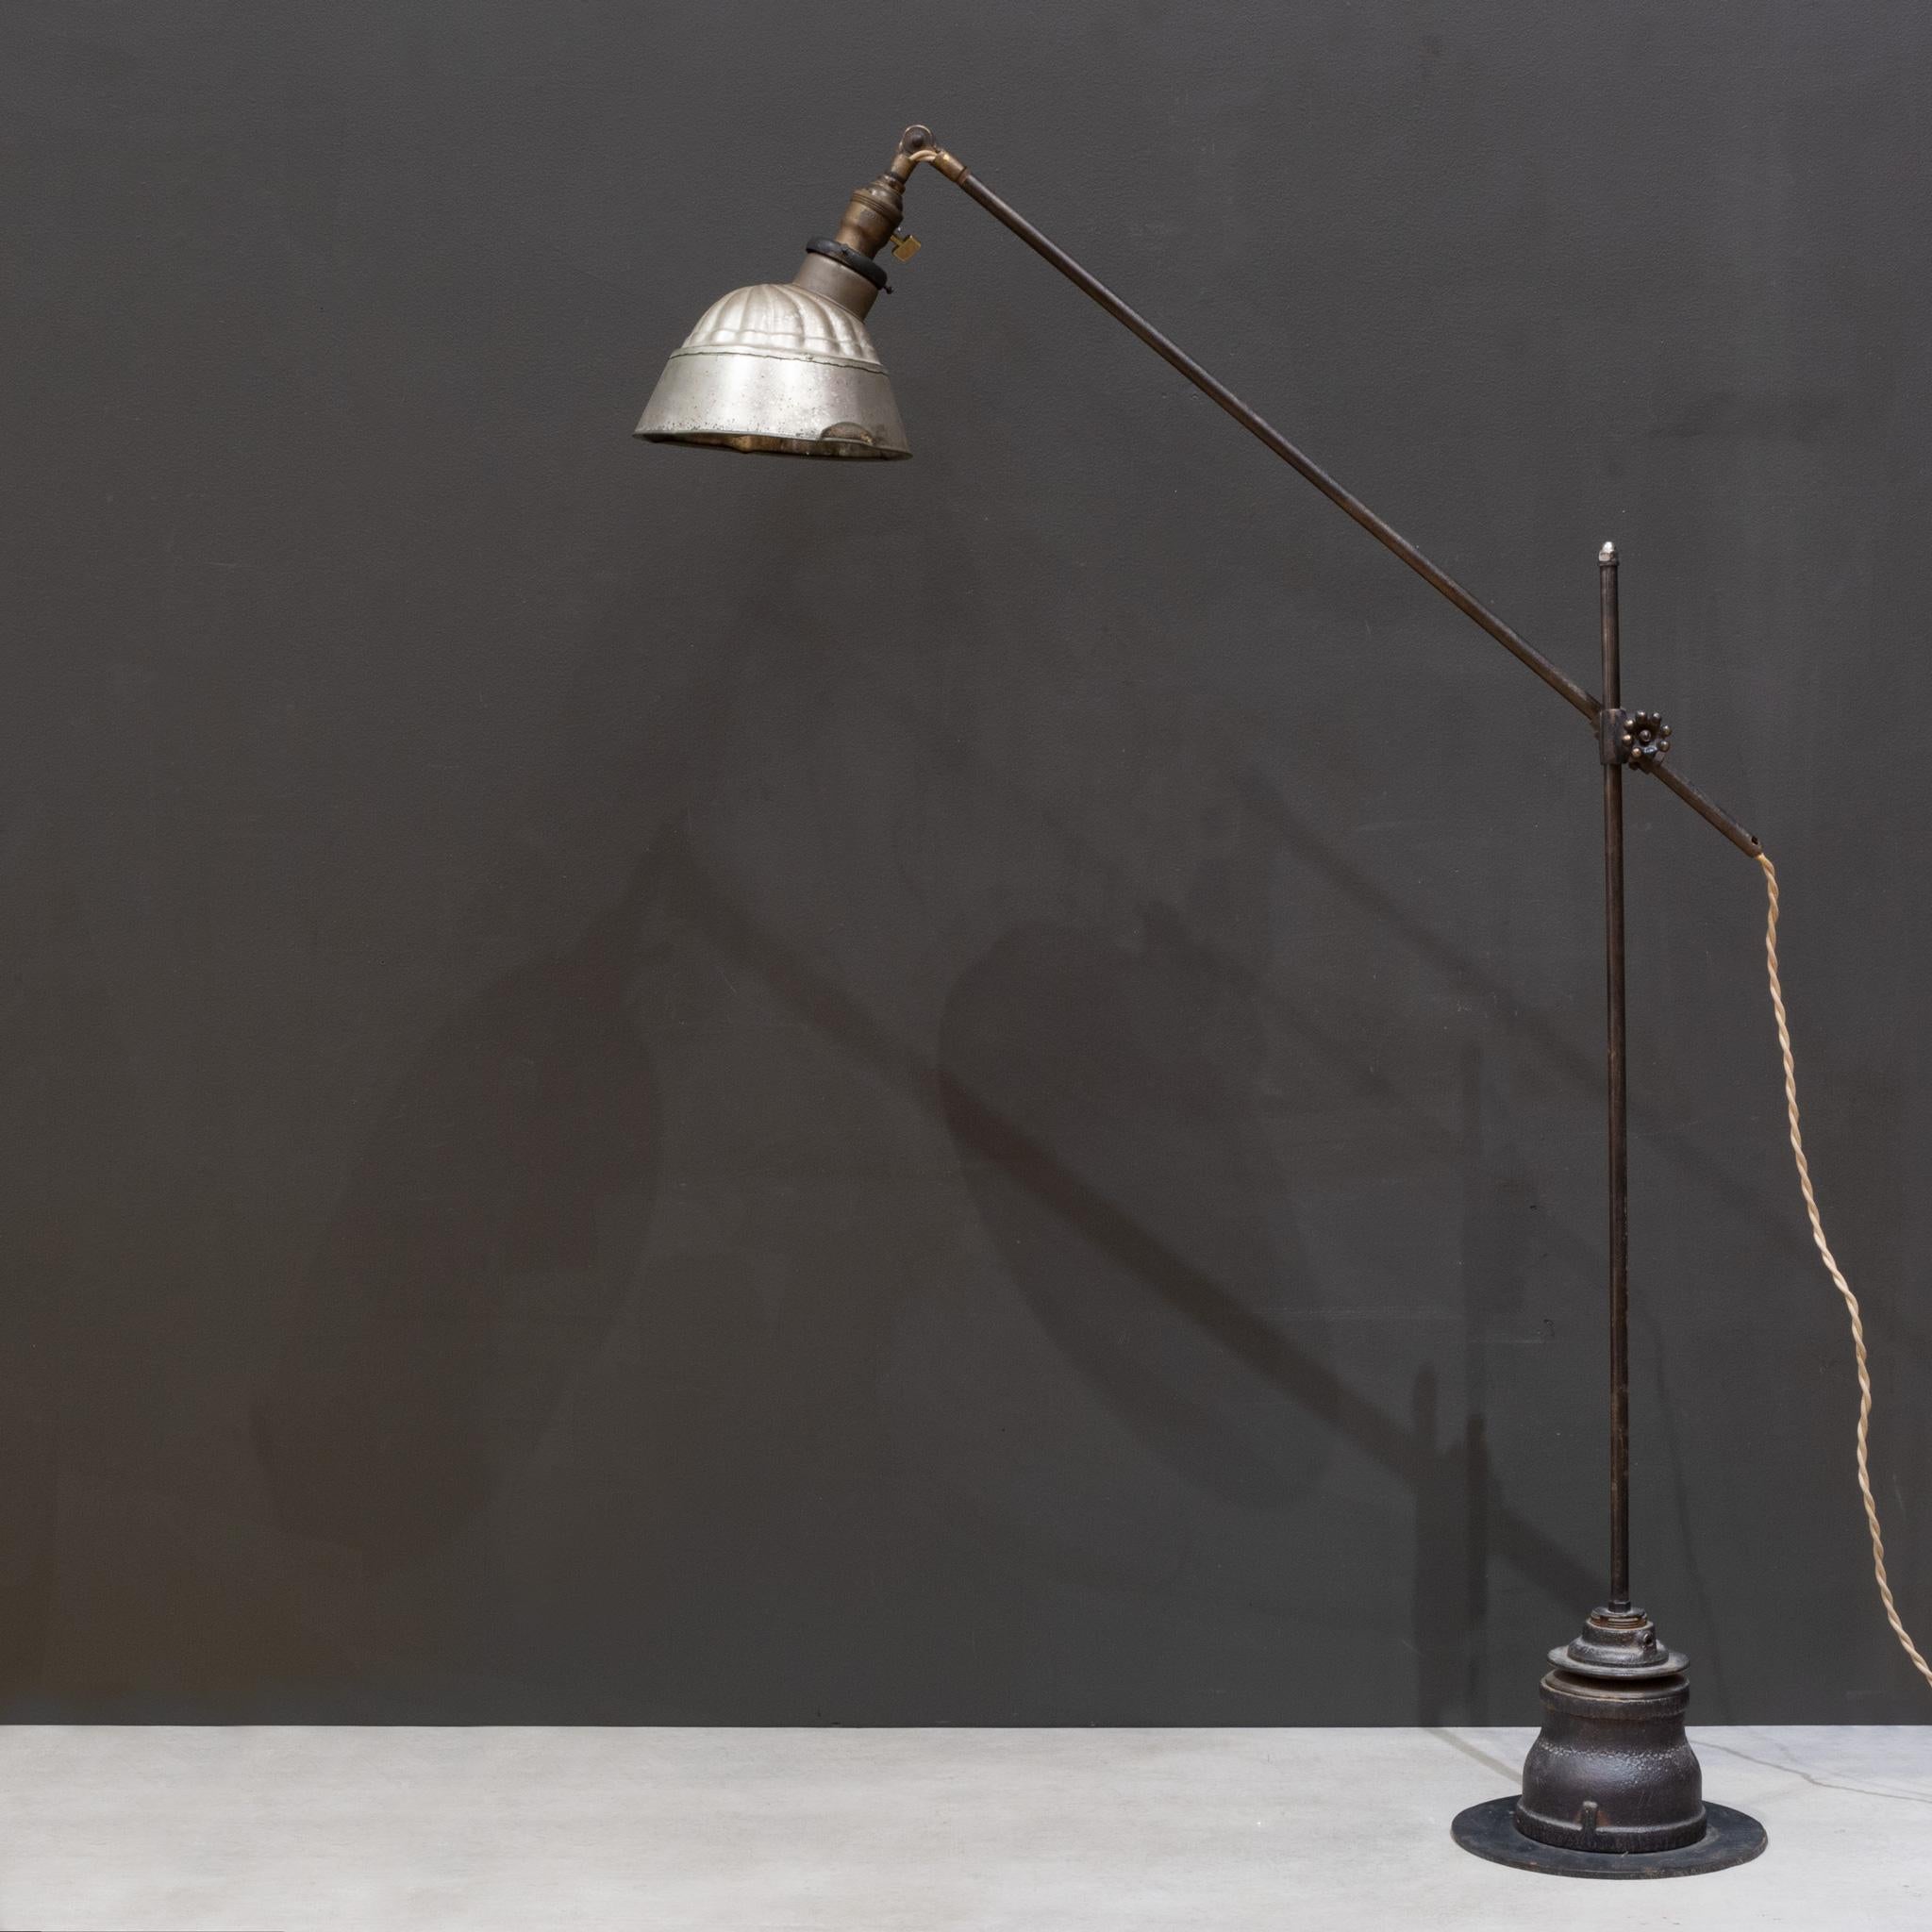 Brass Early 20th c. Industrial Table or Floor Lamp c.1920-1940